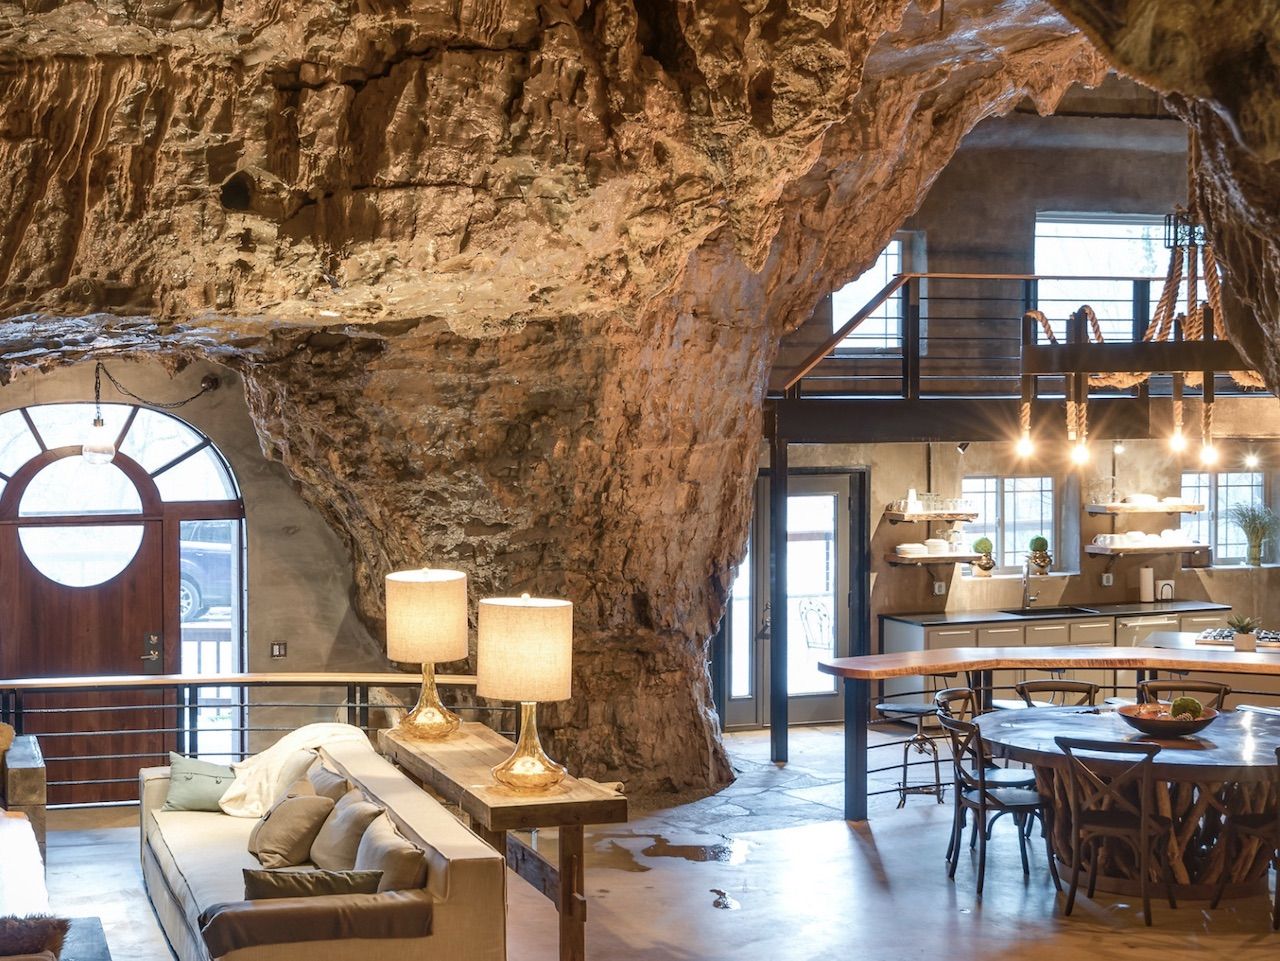 Cave accommodation in the Ozark Mountains in Arkansas